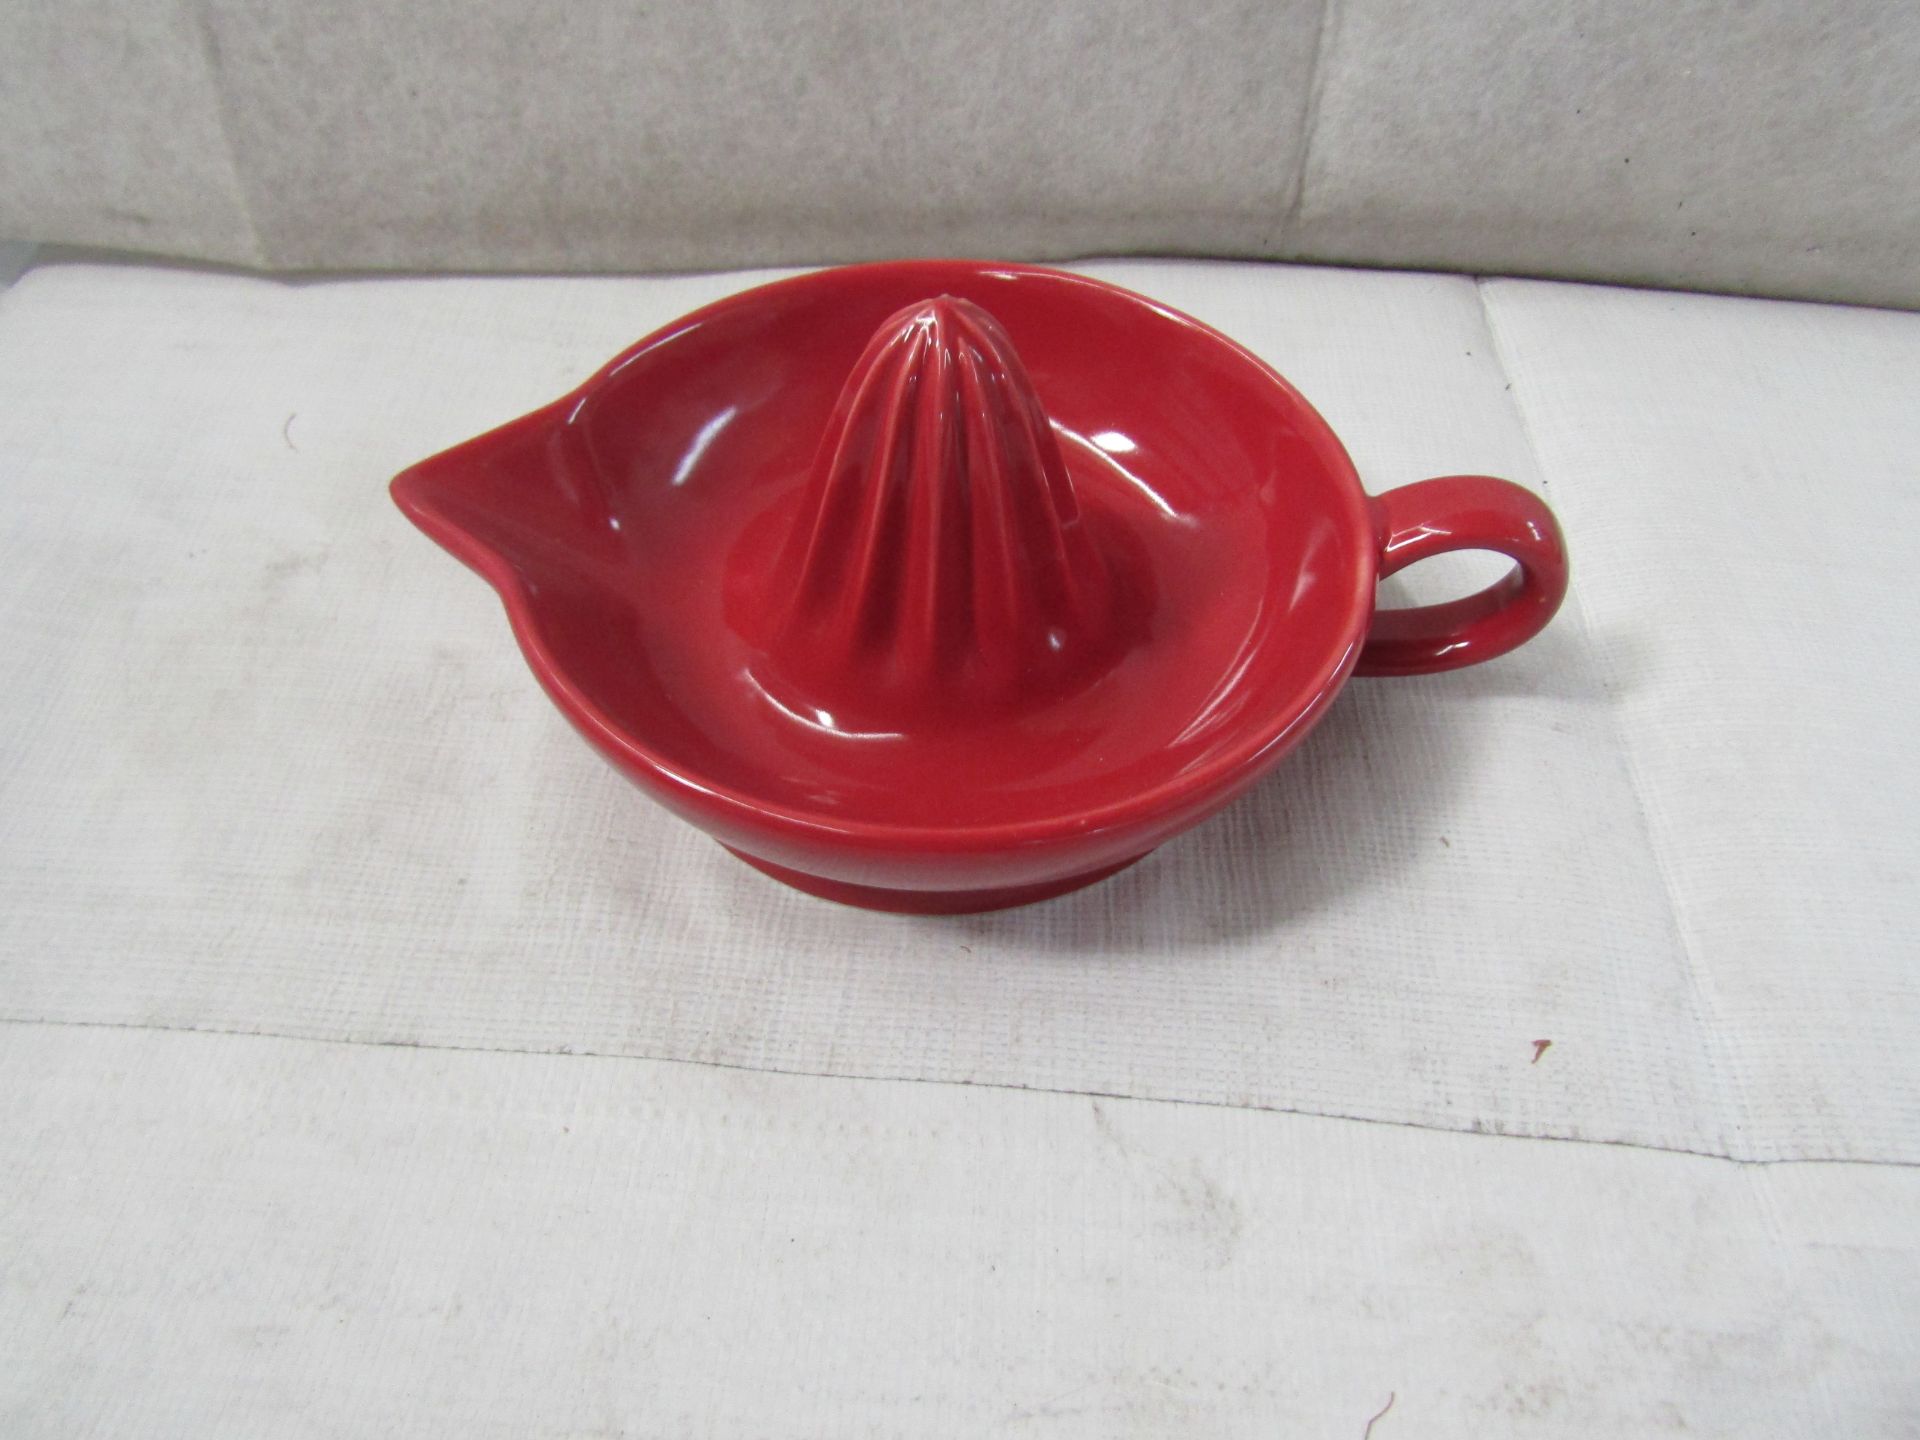 Scoop - Red Large Citrus Juicer - New & Boxed.